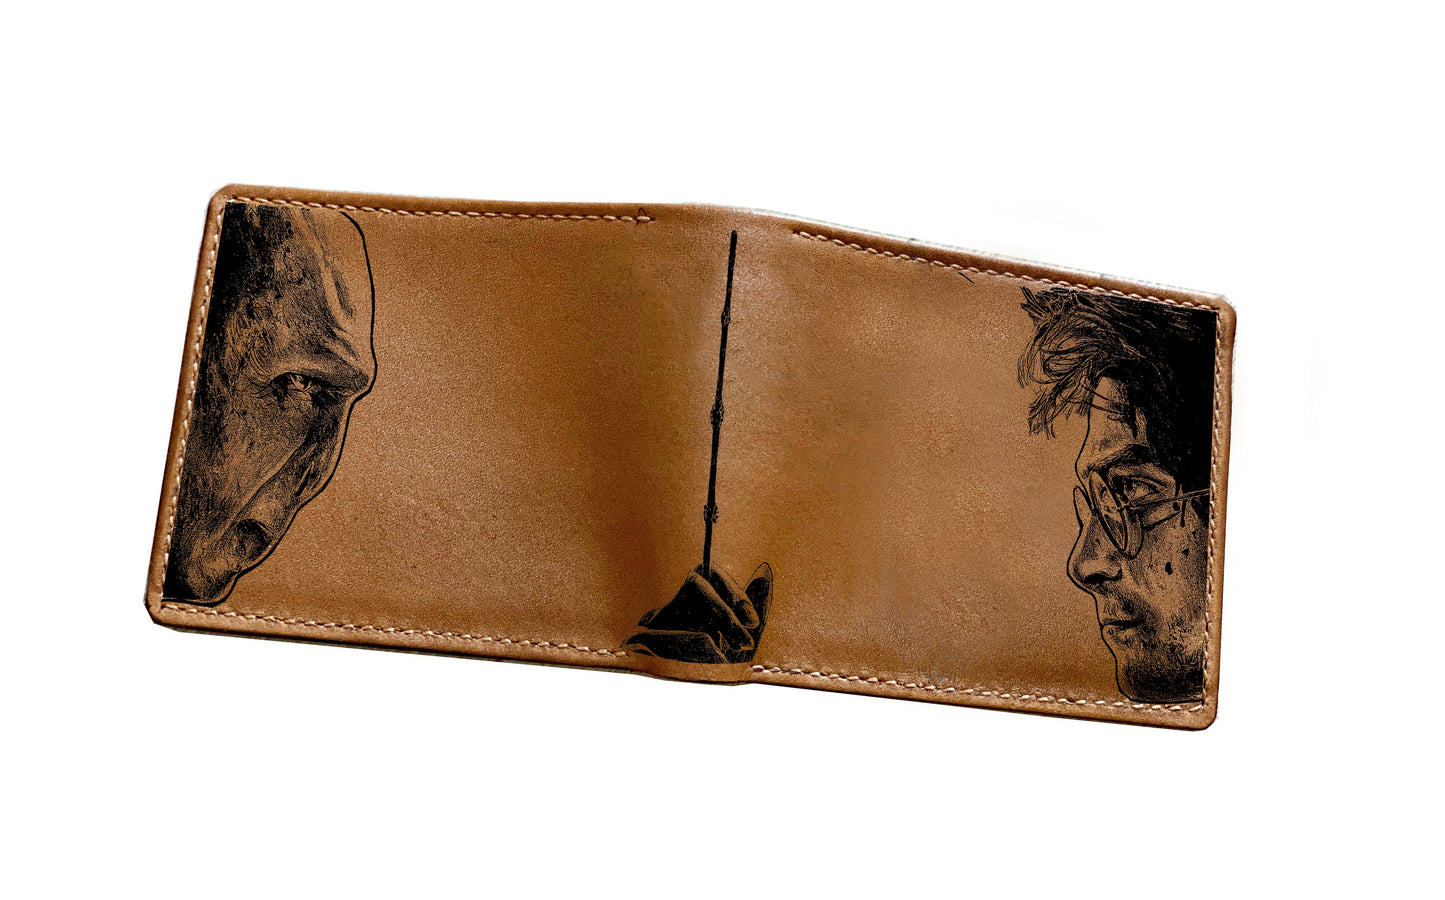 Mayan Corner - Personalized Voldemort the dark Lord wizard leather wallet, Custom Harry Porter leather art gifts, leather birthday present for dad